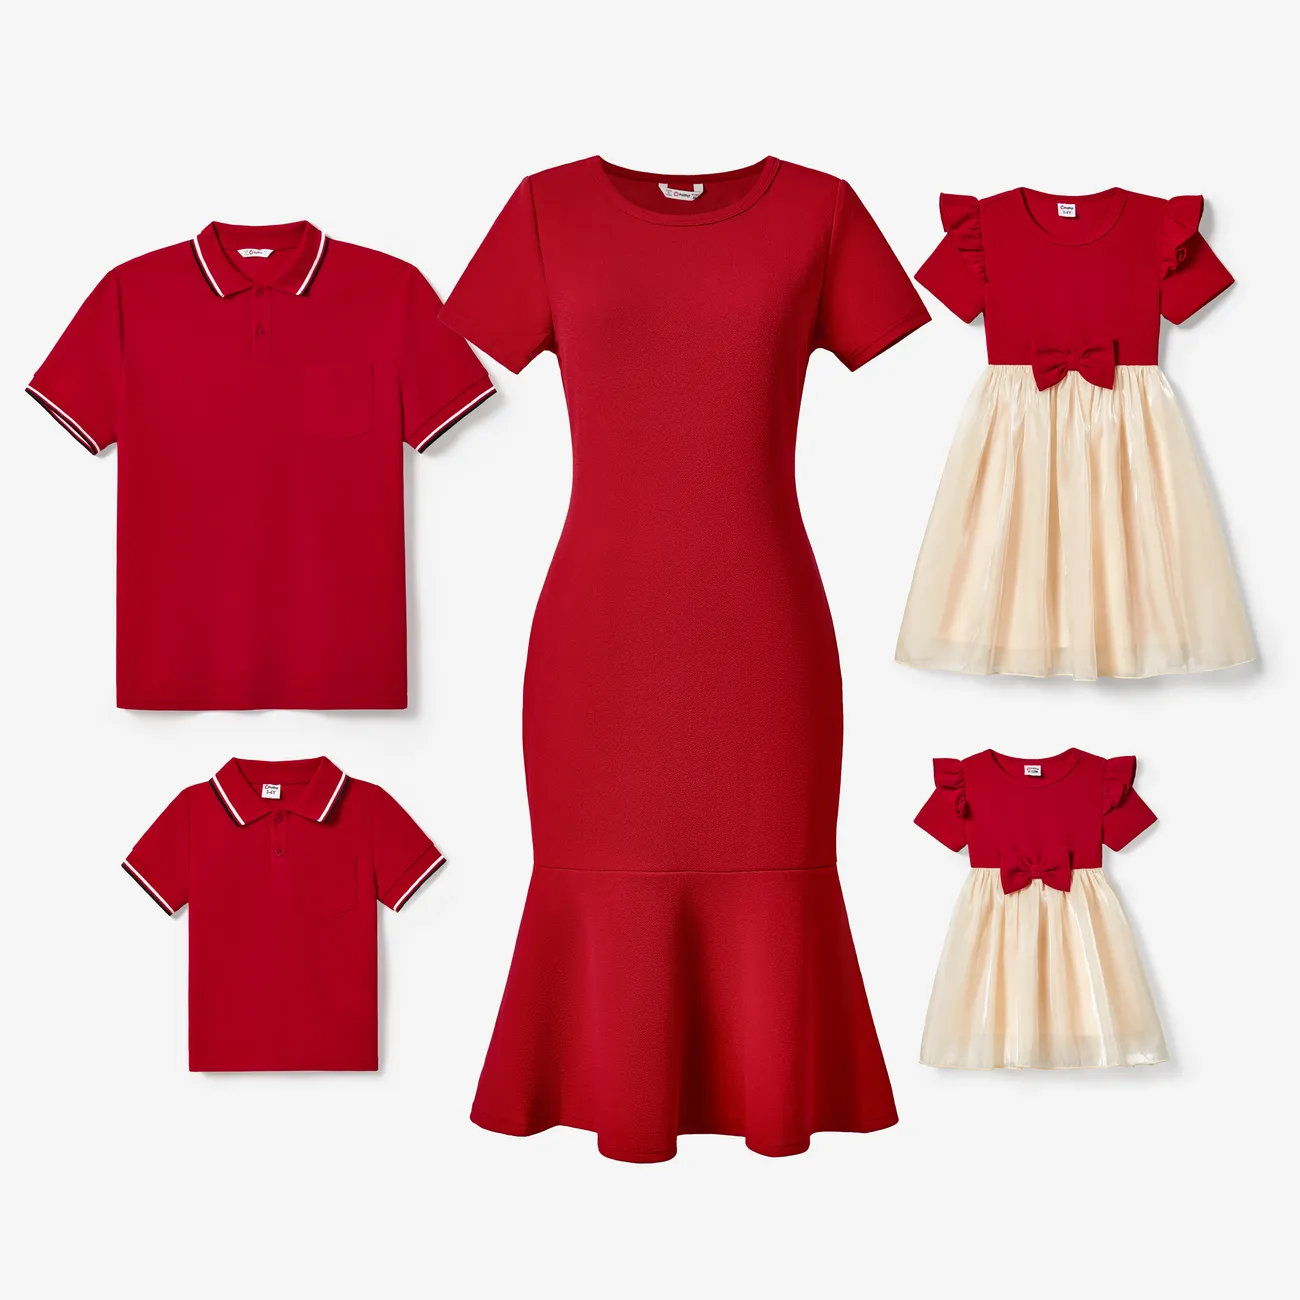 Family Matching Solid Color Short-sleeve Laper-collar Tops and Mermaid/Mesh Dresses Sets Red big image 1